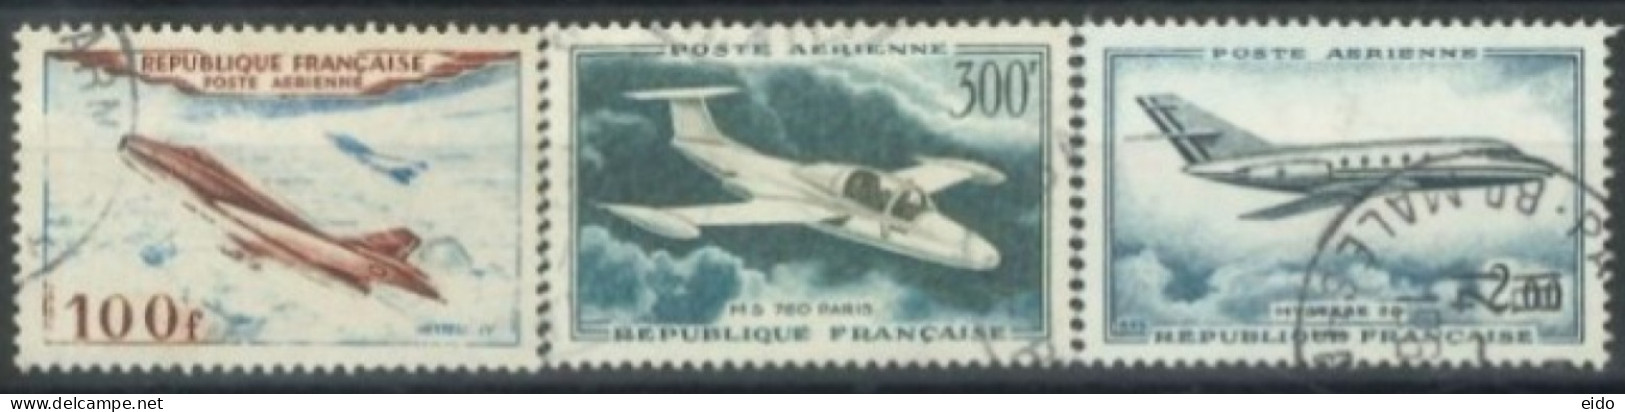 FRANCE - 1954/65 - AIR PLANES STAMPS SET OF 3, USED - Gebraucht